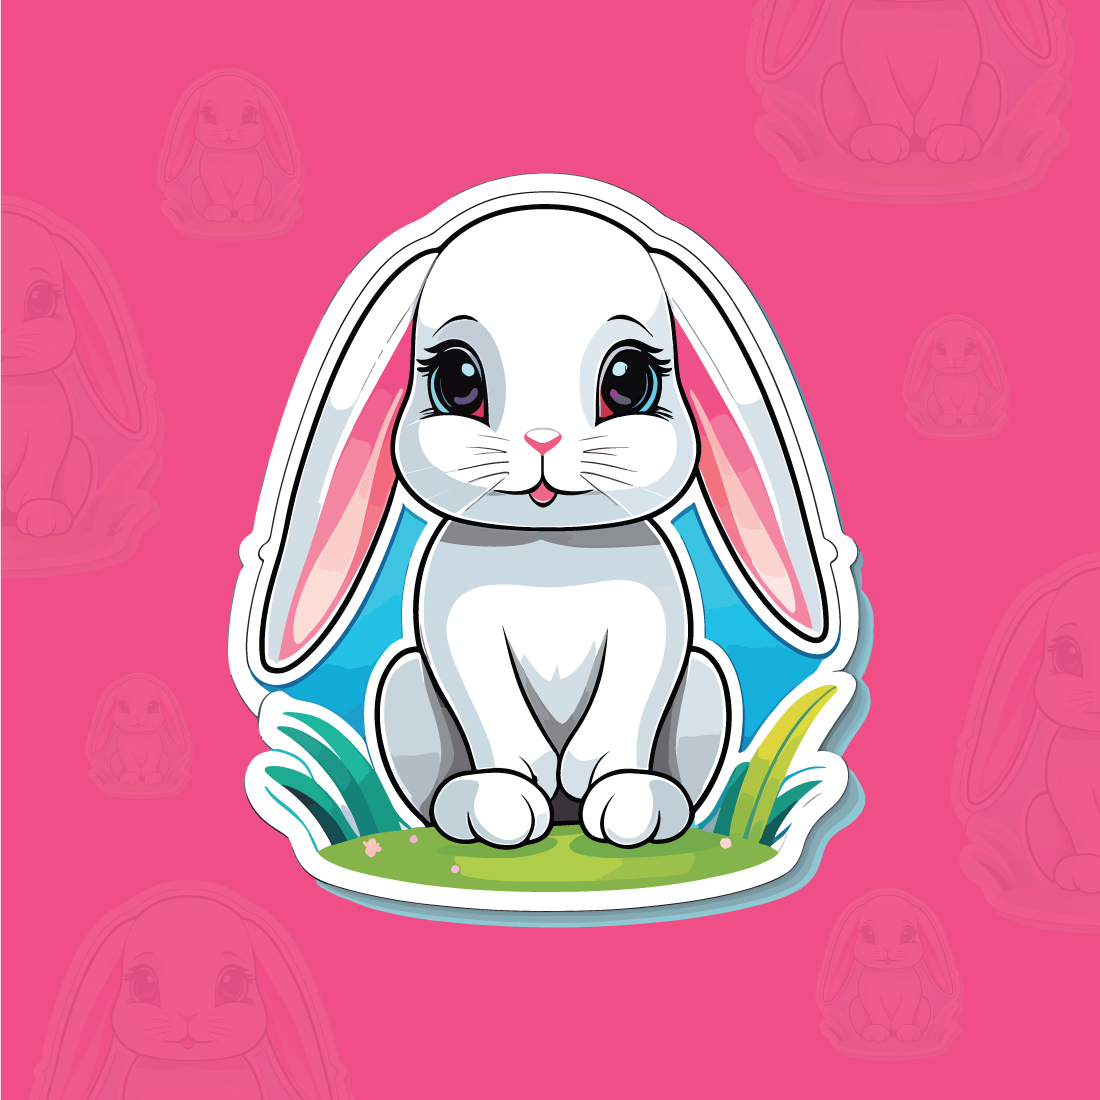 Baby Bunny Sticker & T shirt Design Vector Format Illustration preview image.